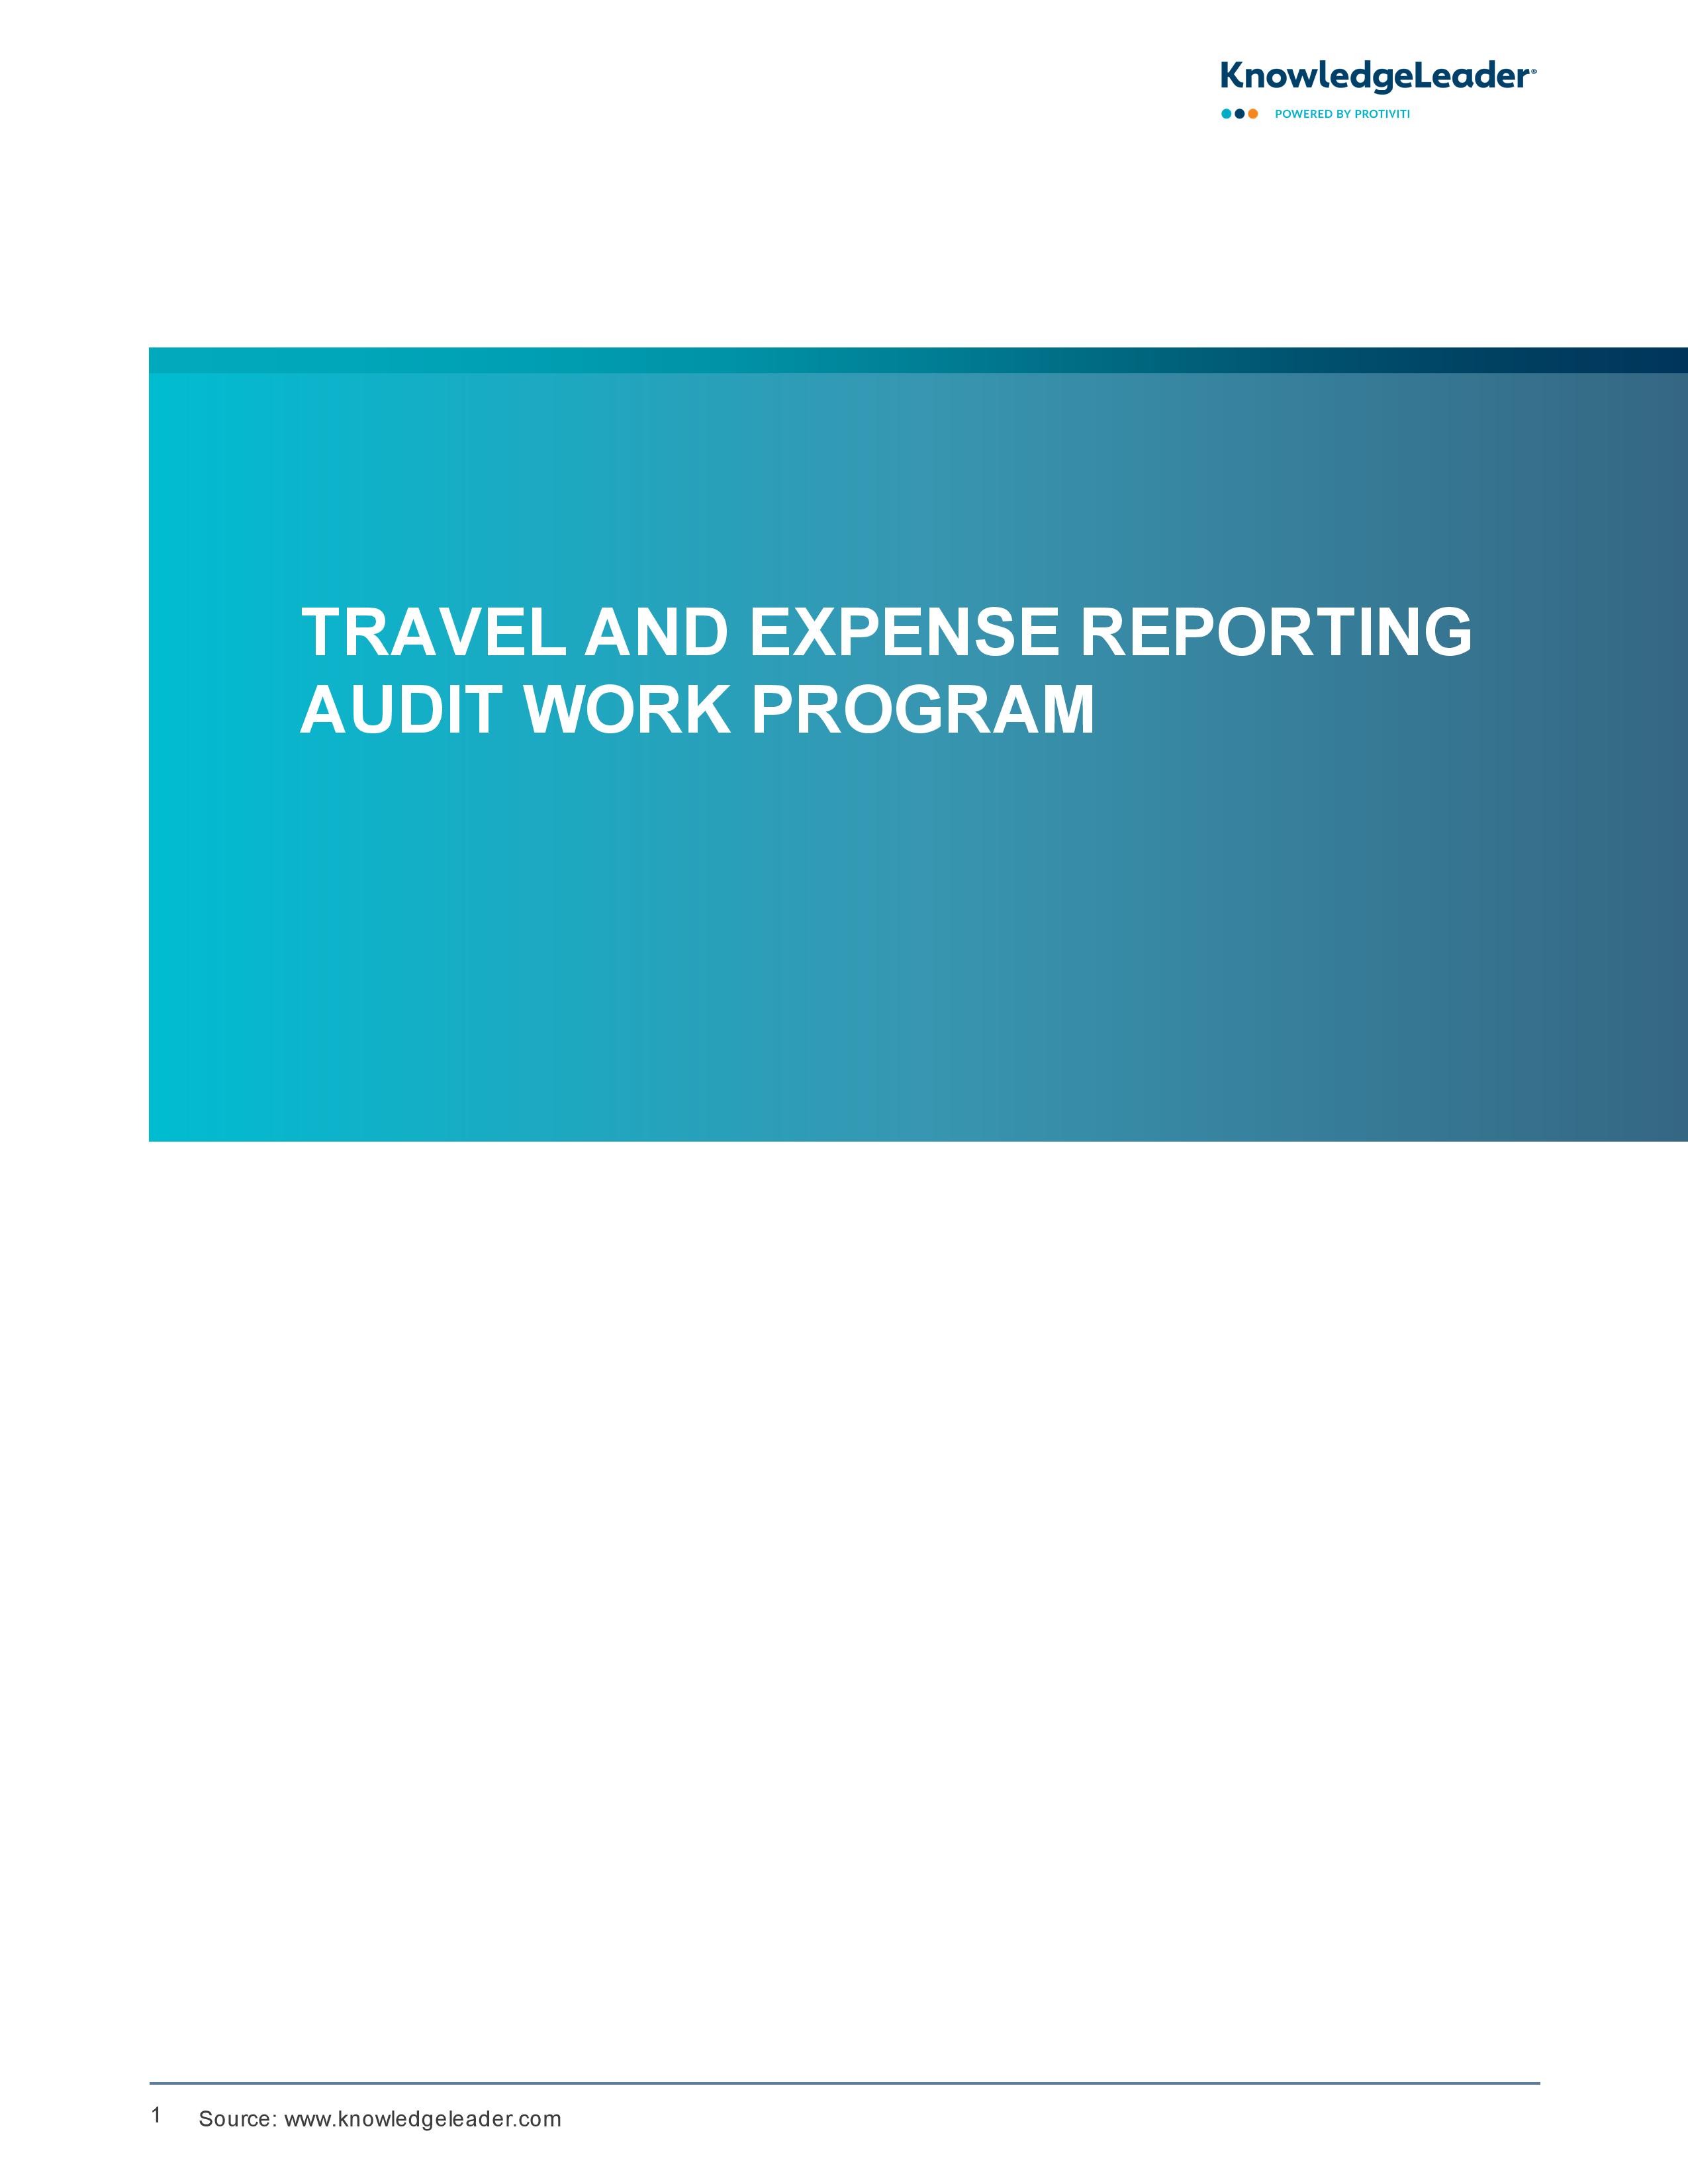 screenshot of the first page of Travel and Expense Reporting Audit Work Program